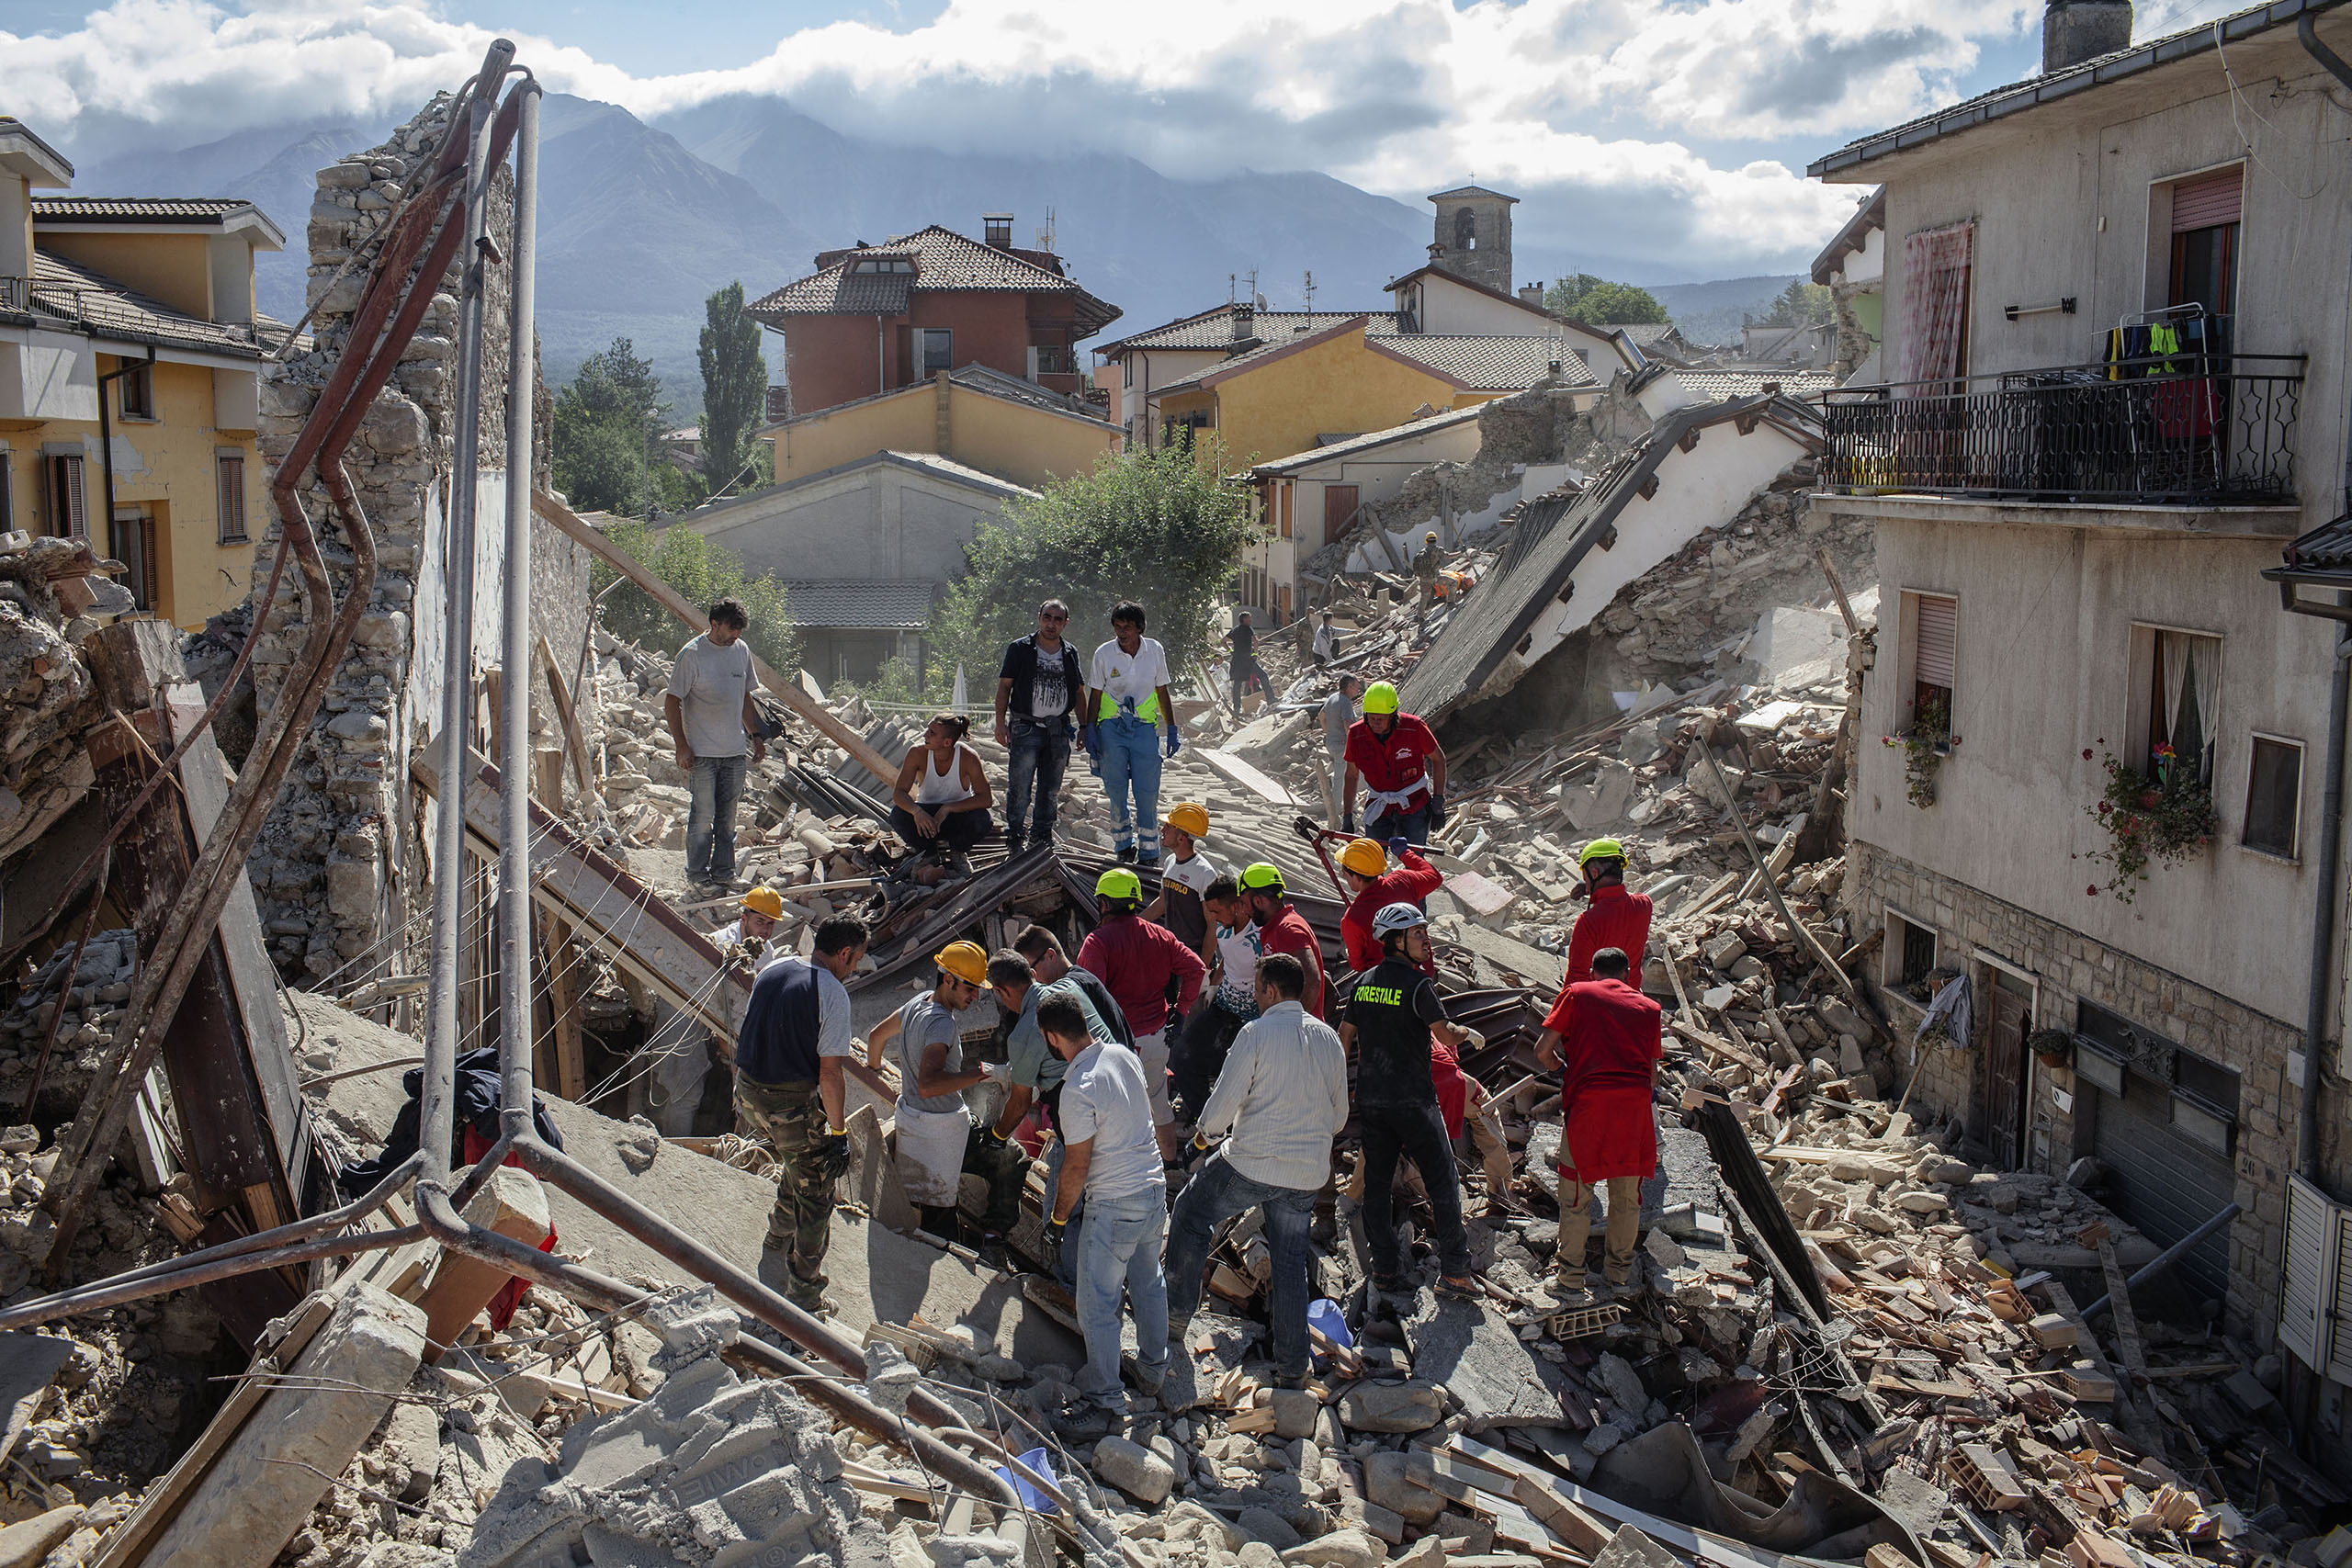 Rescue teams look for survivors in Amatrice, Italy, on Aug. 24, 2016.